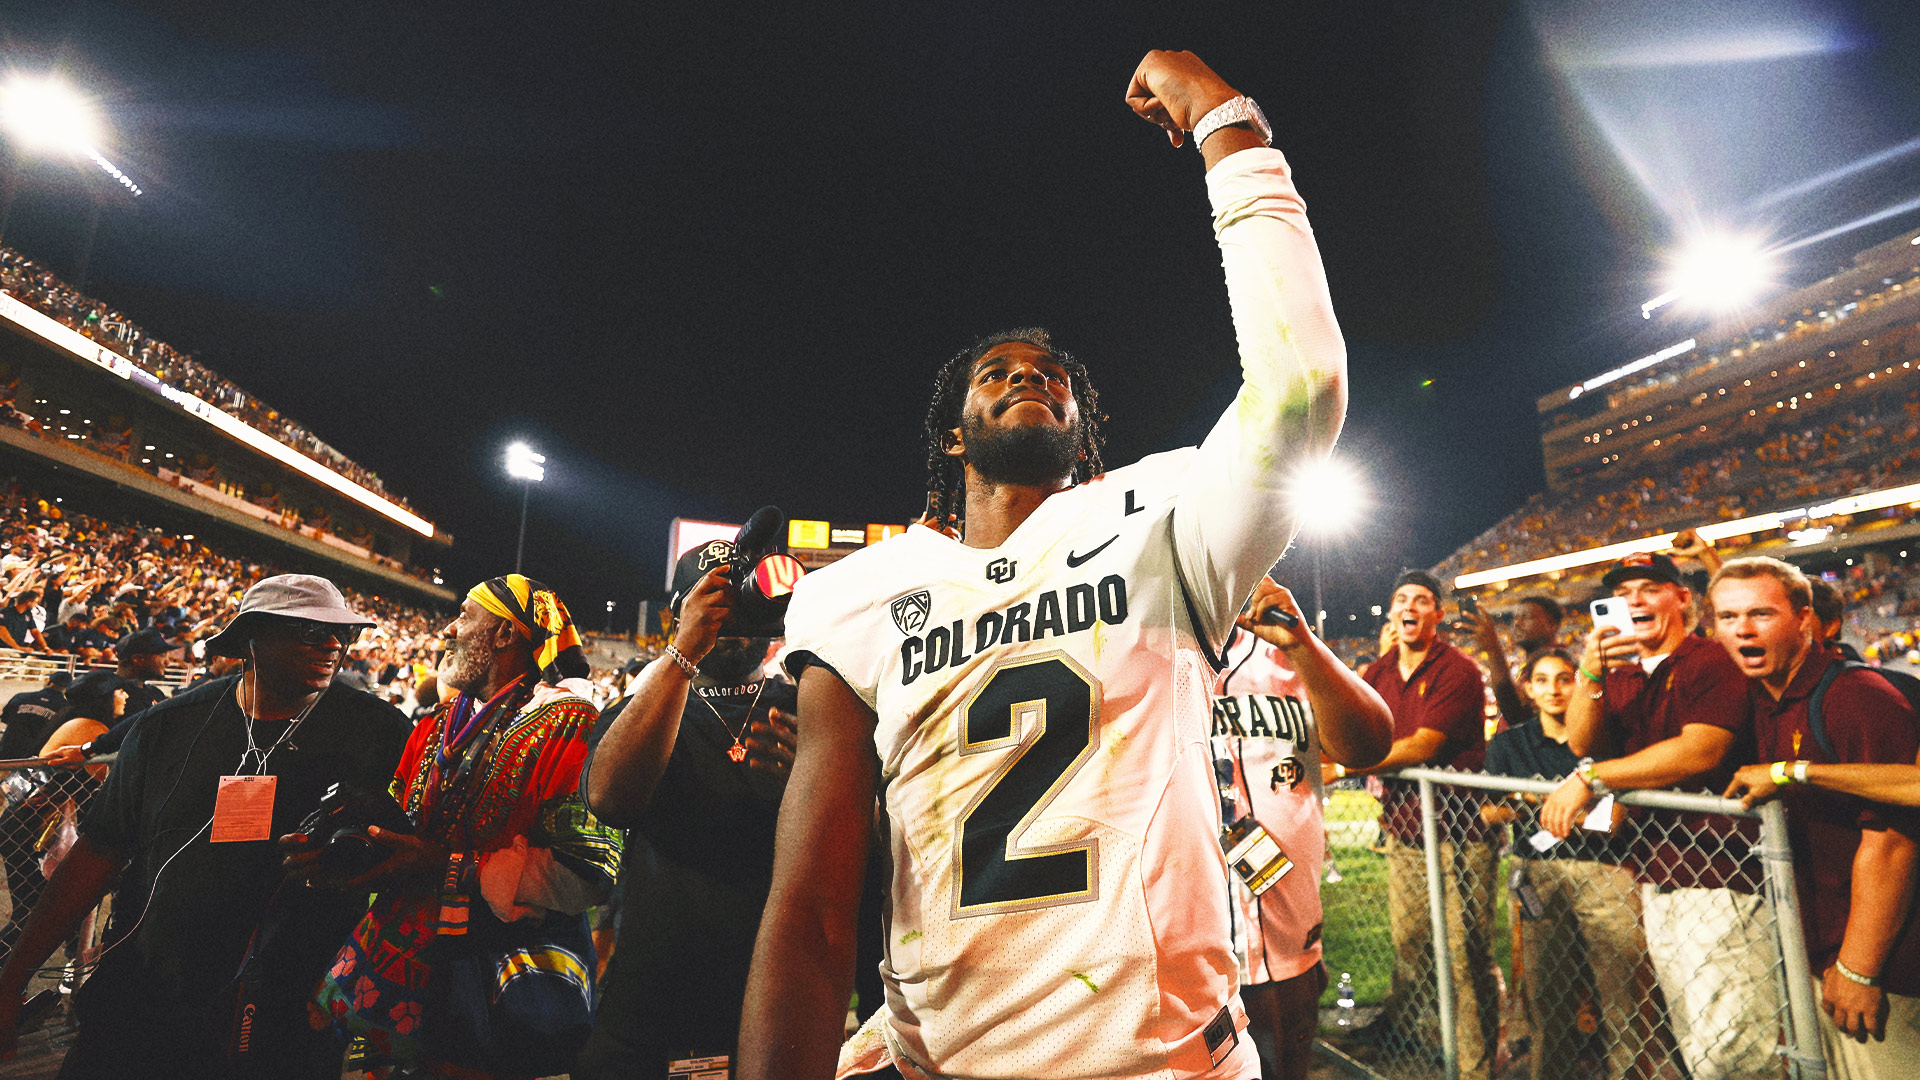 Colorado beats Arizona State in final minute for Deion Sanders' first Pac-12 win